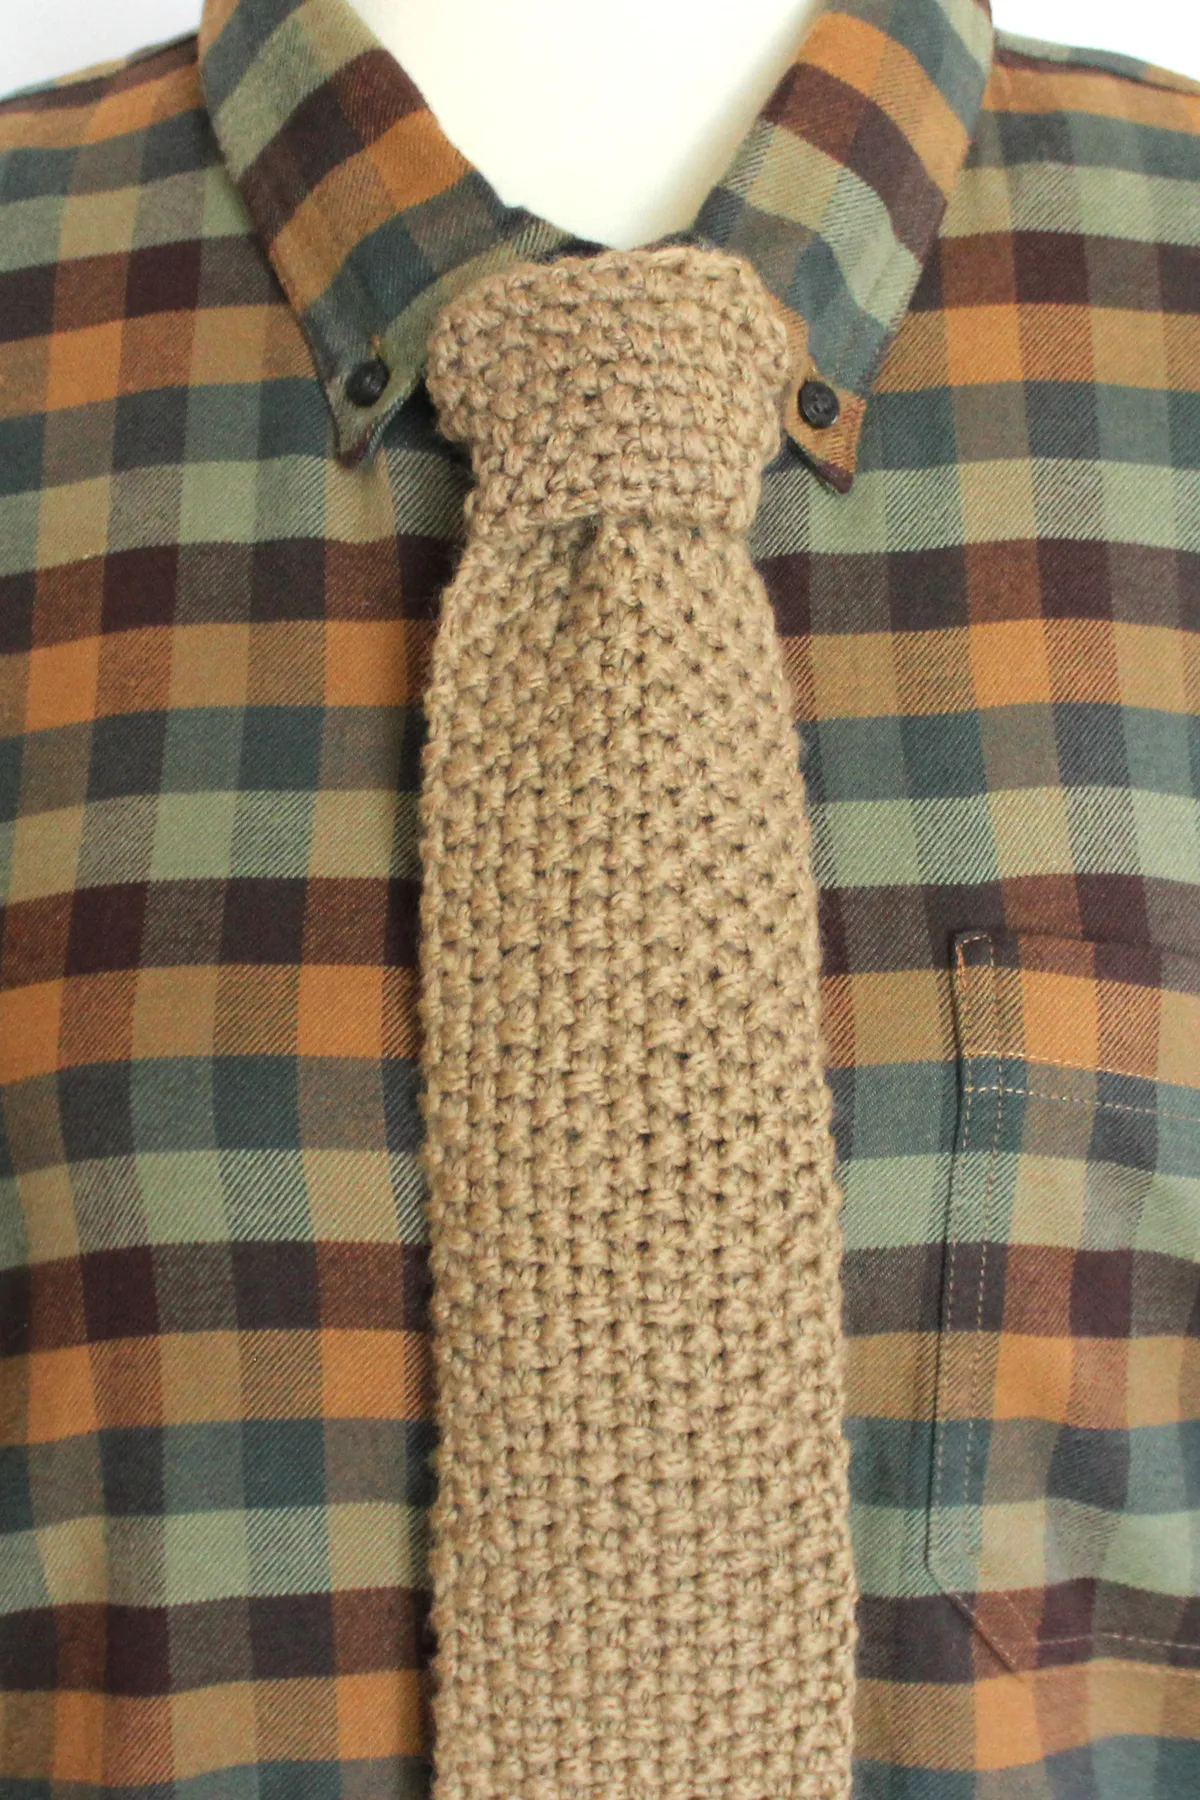 Knitted necktie in tan color worn on green and brown checkered shirt.